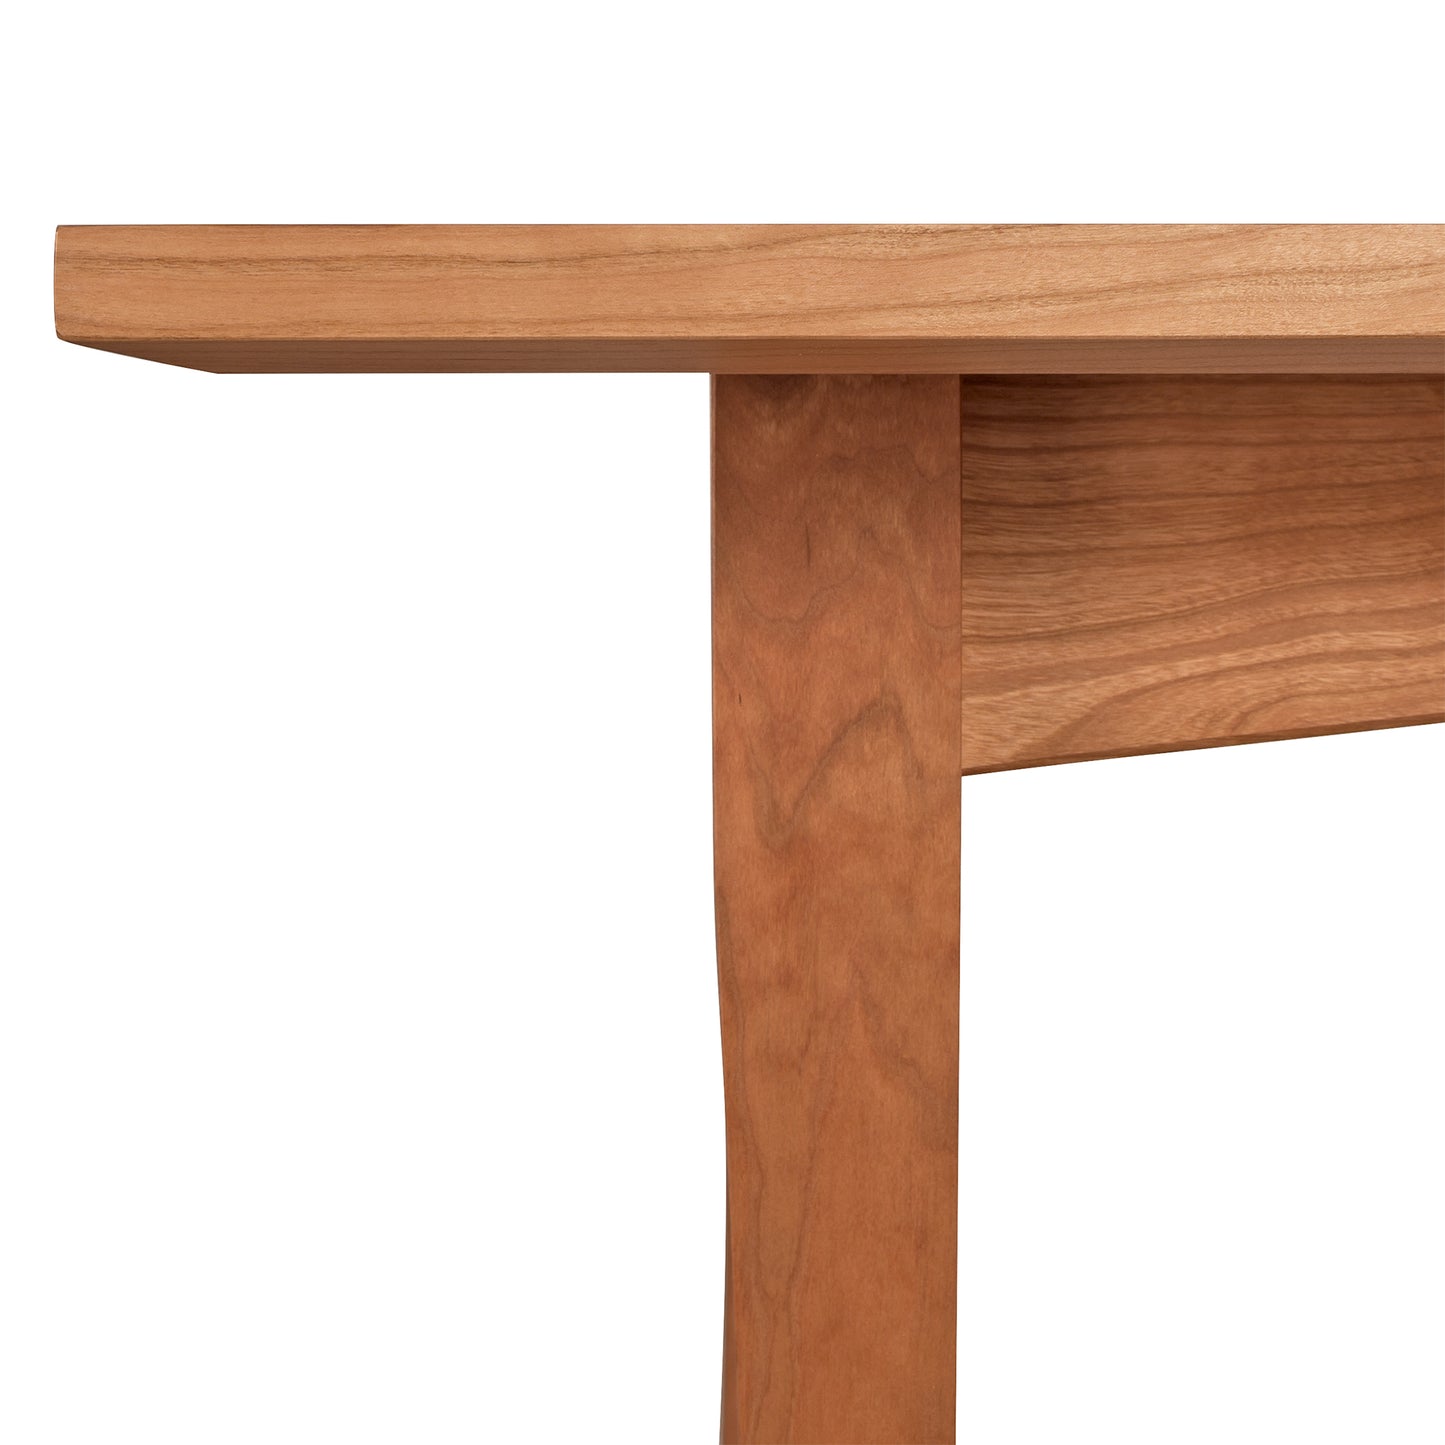 Close-up view of a American Shaker Extension Dining Table from the Maple Corner Woodworks Collection showing details of its smooth tabletop and sturdy leg, featuring rich wood grain texture, isolated on a white background.